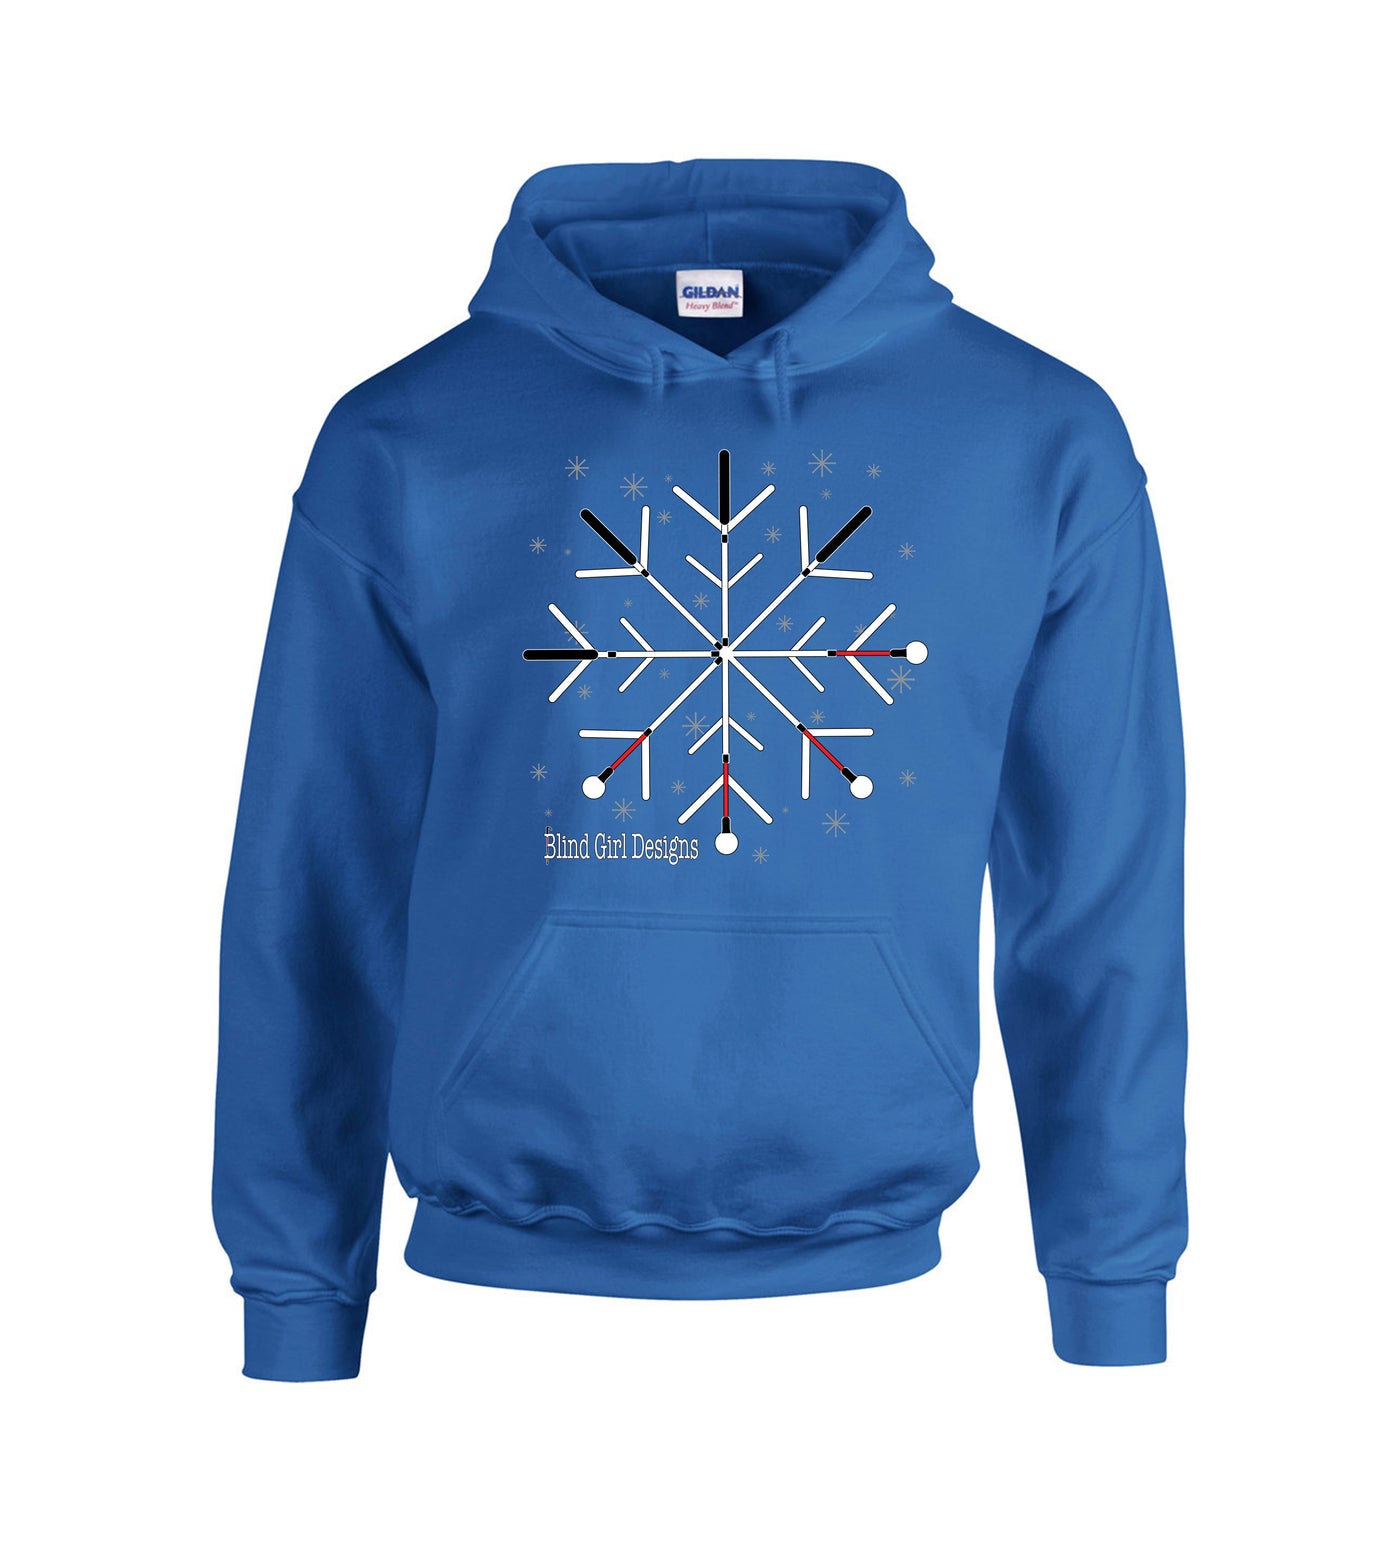 A classic Royal Blue color for everyone to wear in a unisex hoodie  sweatshirt. There is a large chest  print of a snowflake made of crossing blind canes. There are red and white canes that form the snowflake. They are crossed to look  like a spoke. Each spoke has 2V shapes, which gives it the snowflake outlook. There are tiny snowflakes sprinkled around the main snowflake. It is a standard  hoodie sweatshirt fit with a large front pocket and large hood.